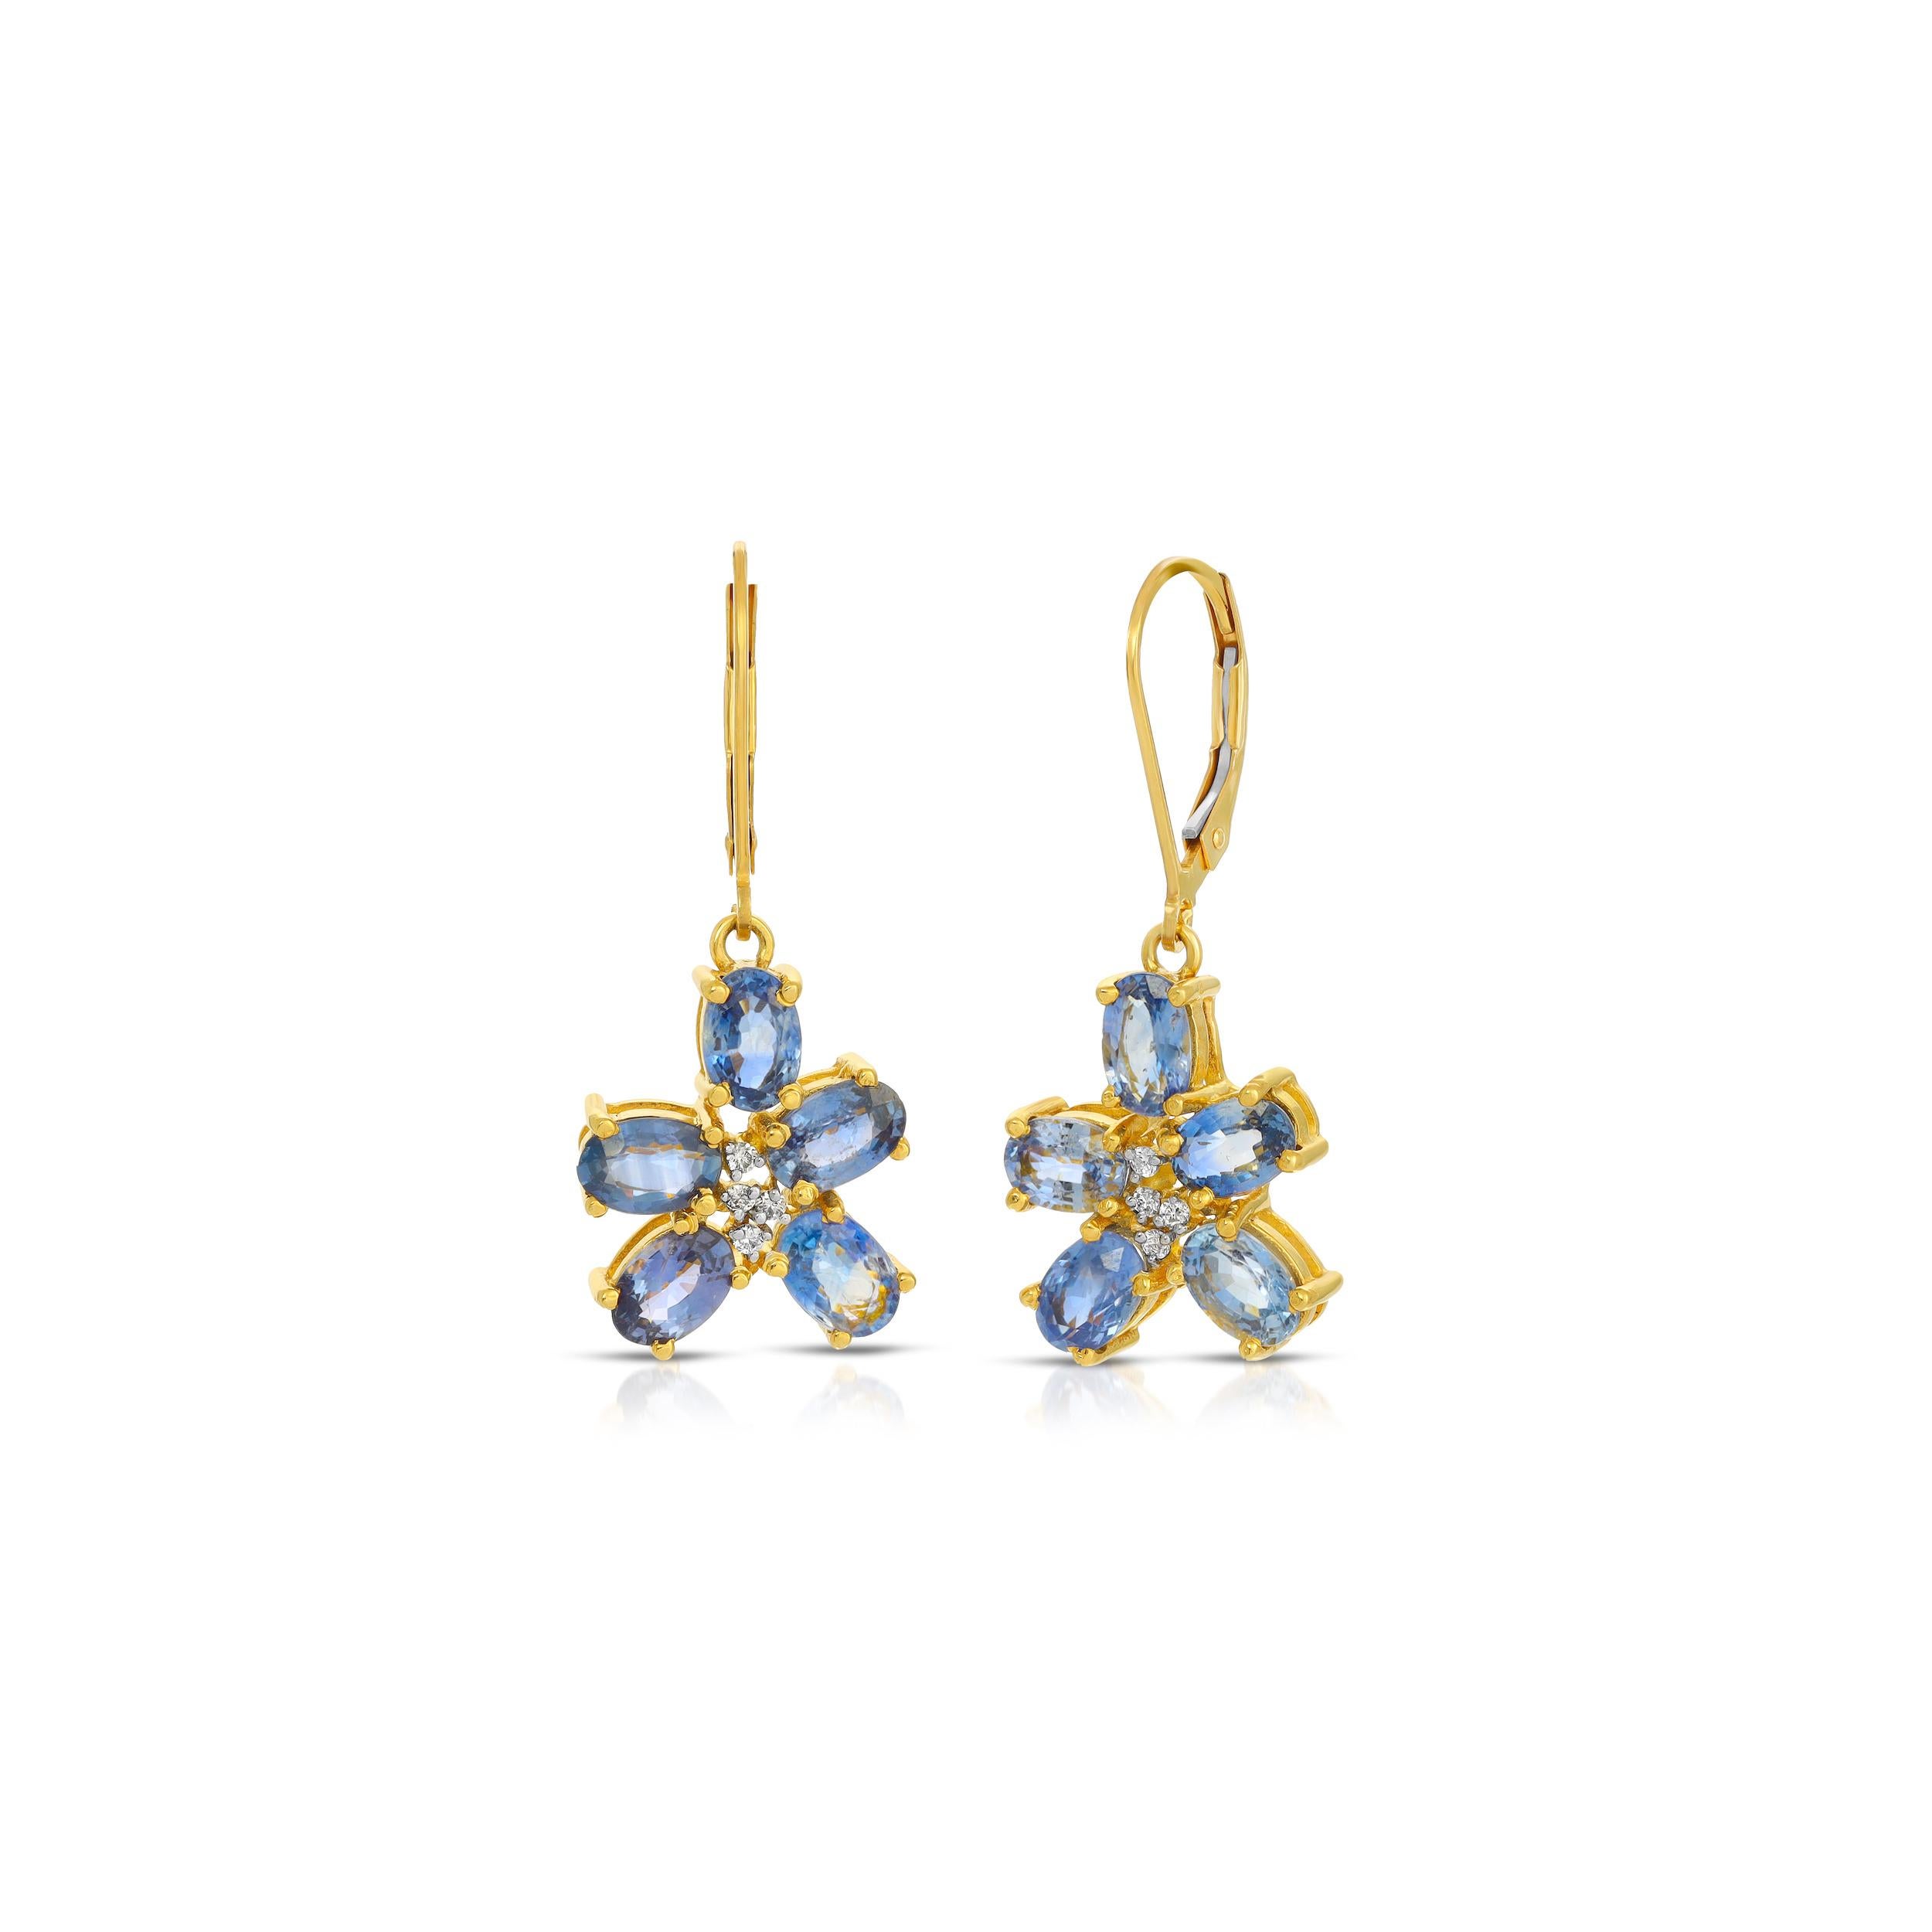 Spectacularly beautiful drop earrings of 18 Karat Gold featuring 6.05 Carats of luminous blue Sapphire petal flowers with 1.40 Carats of Brilliant Cut White Diamond centers. These fabulous earrings are suspended on gold hooks with secure lock